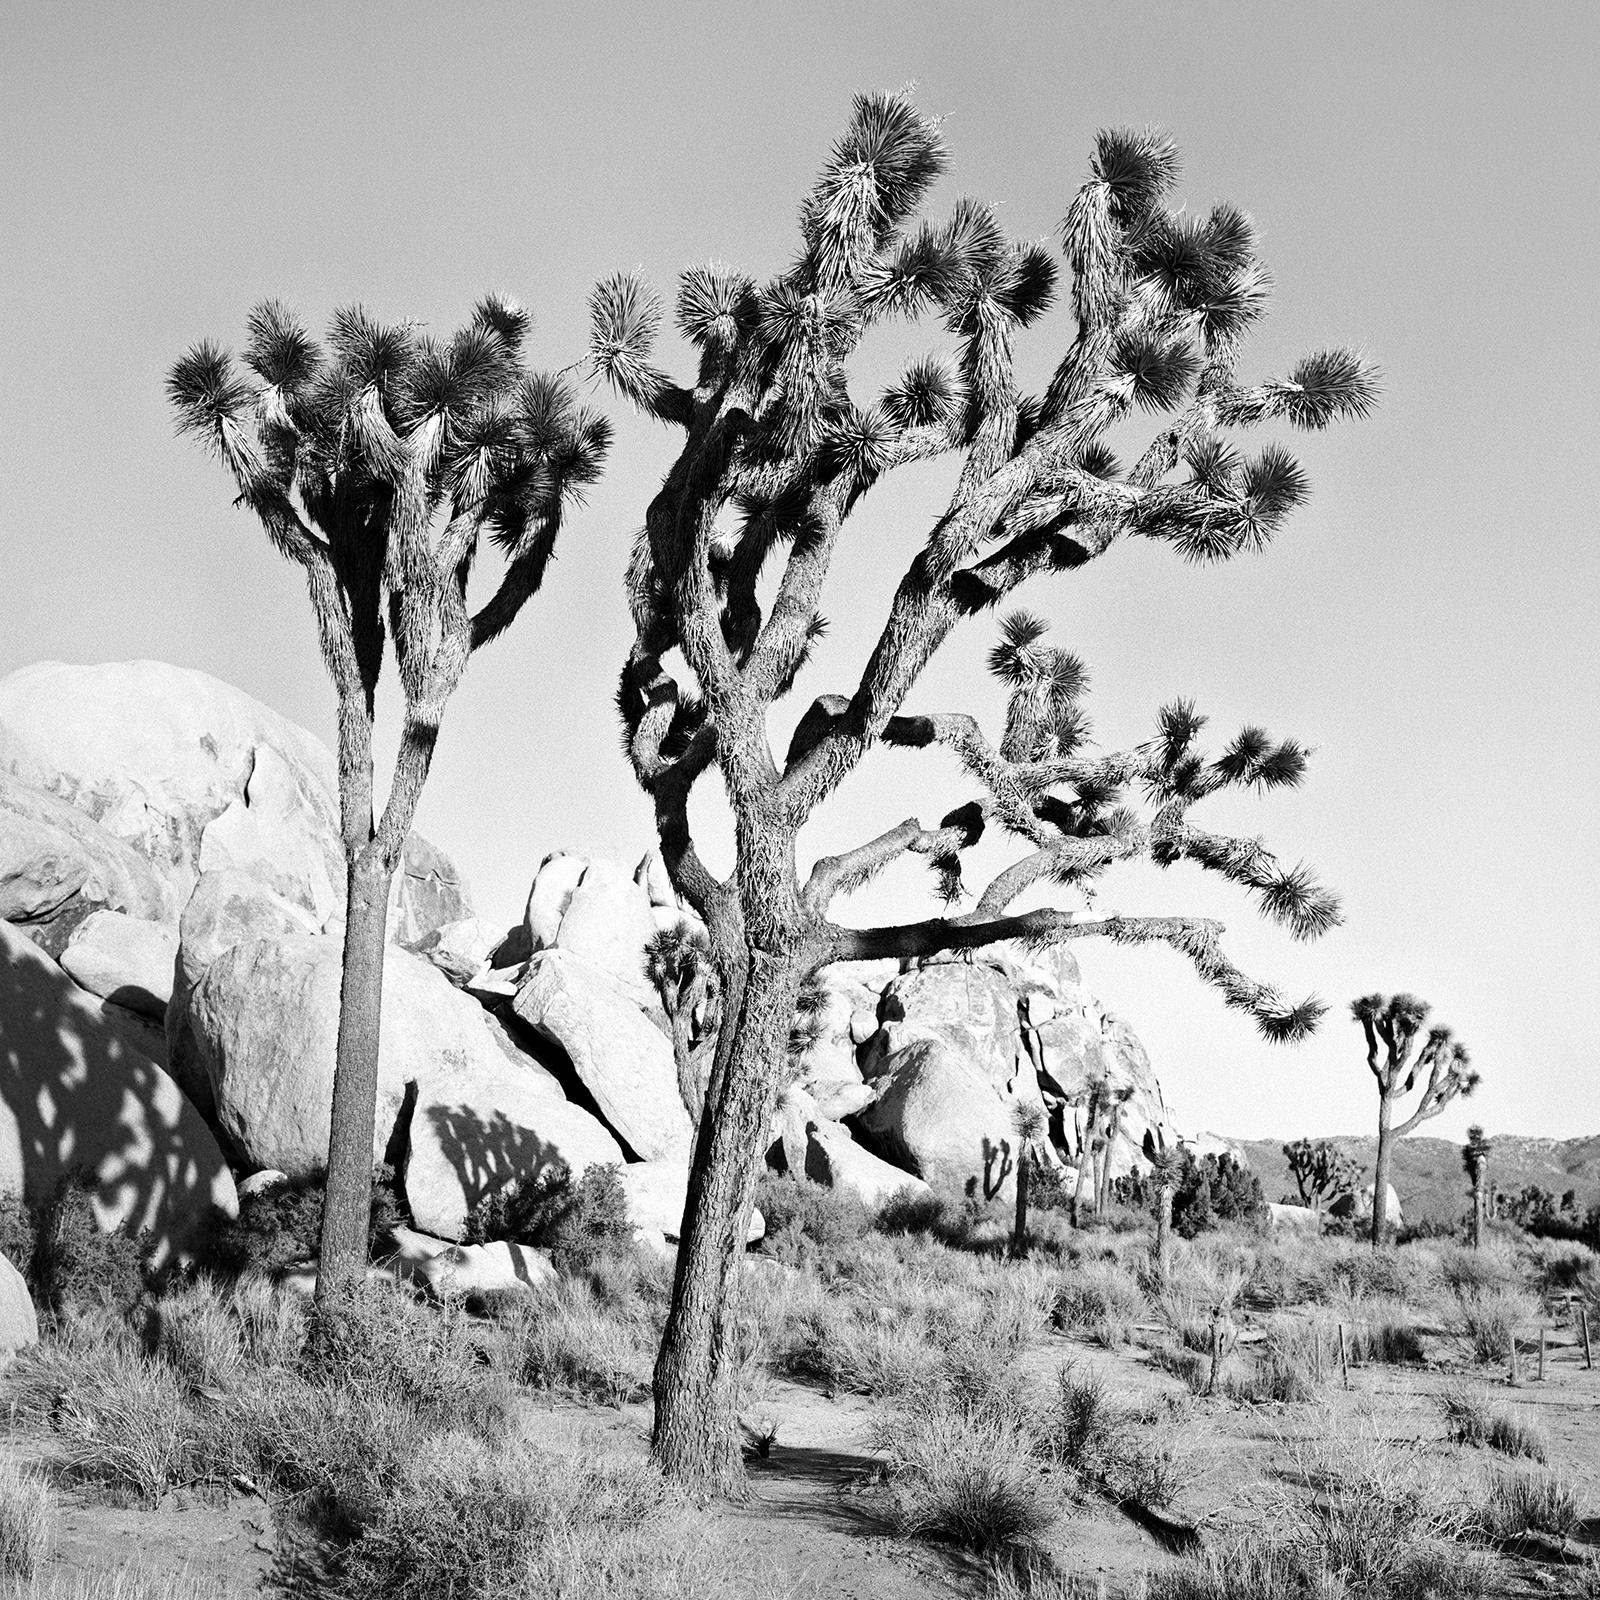 Black and White Fine Art Landscape Photography. Joshua Trees and Rocks in the Mojave desert, California, USA. Archival pigment ink print, edition of 9. Signed, titled, dated and numbered by artist. Certificate of authenticity included. Printed with